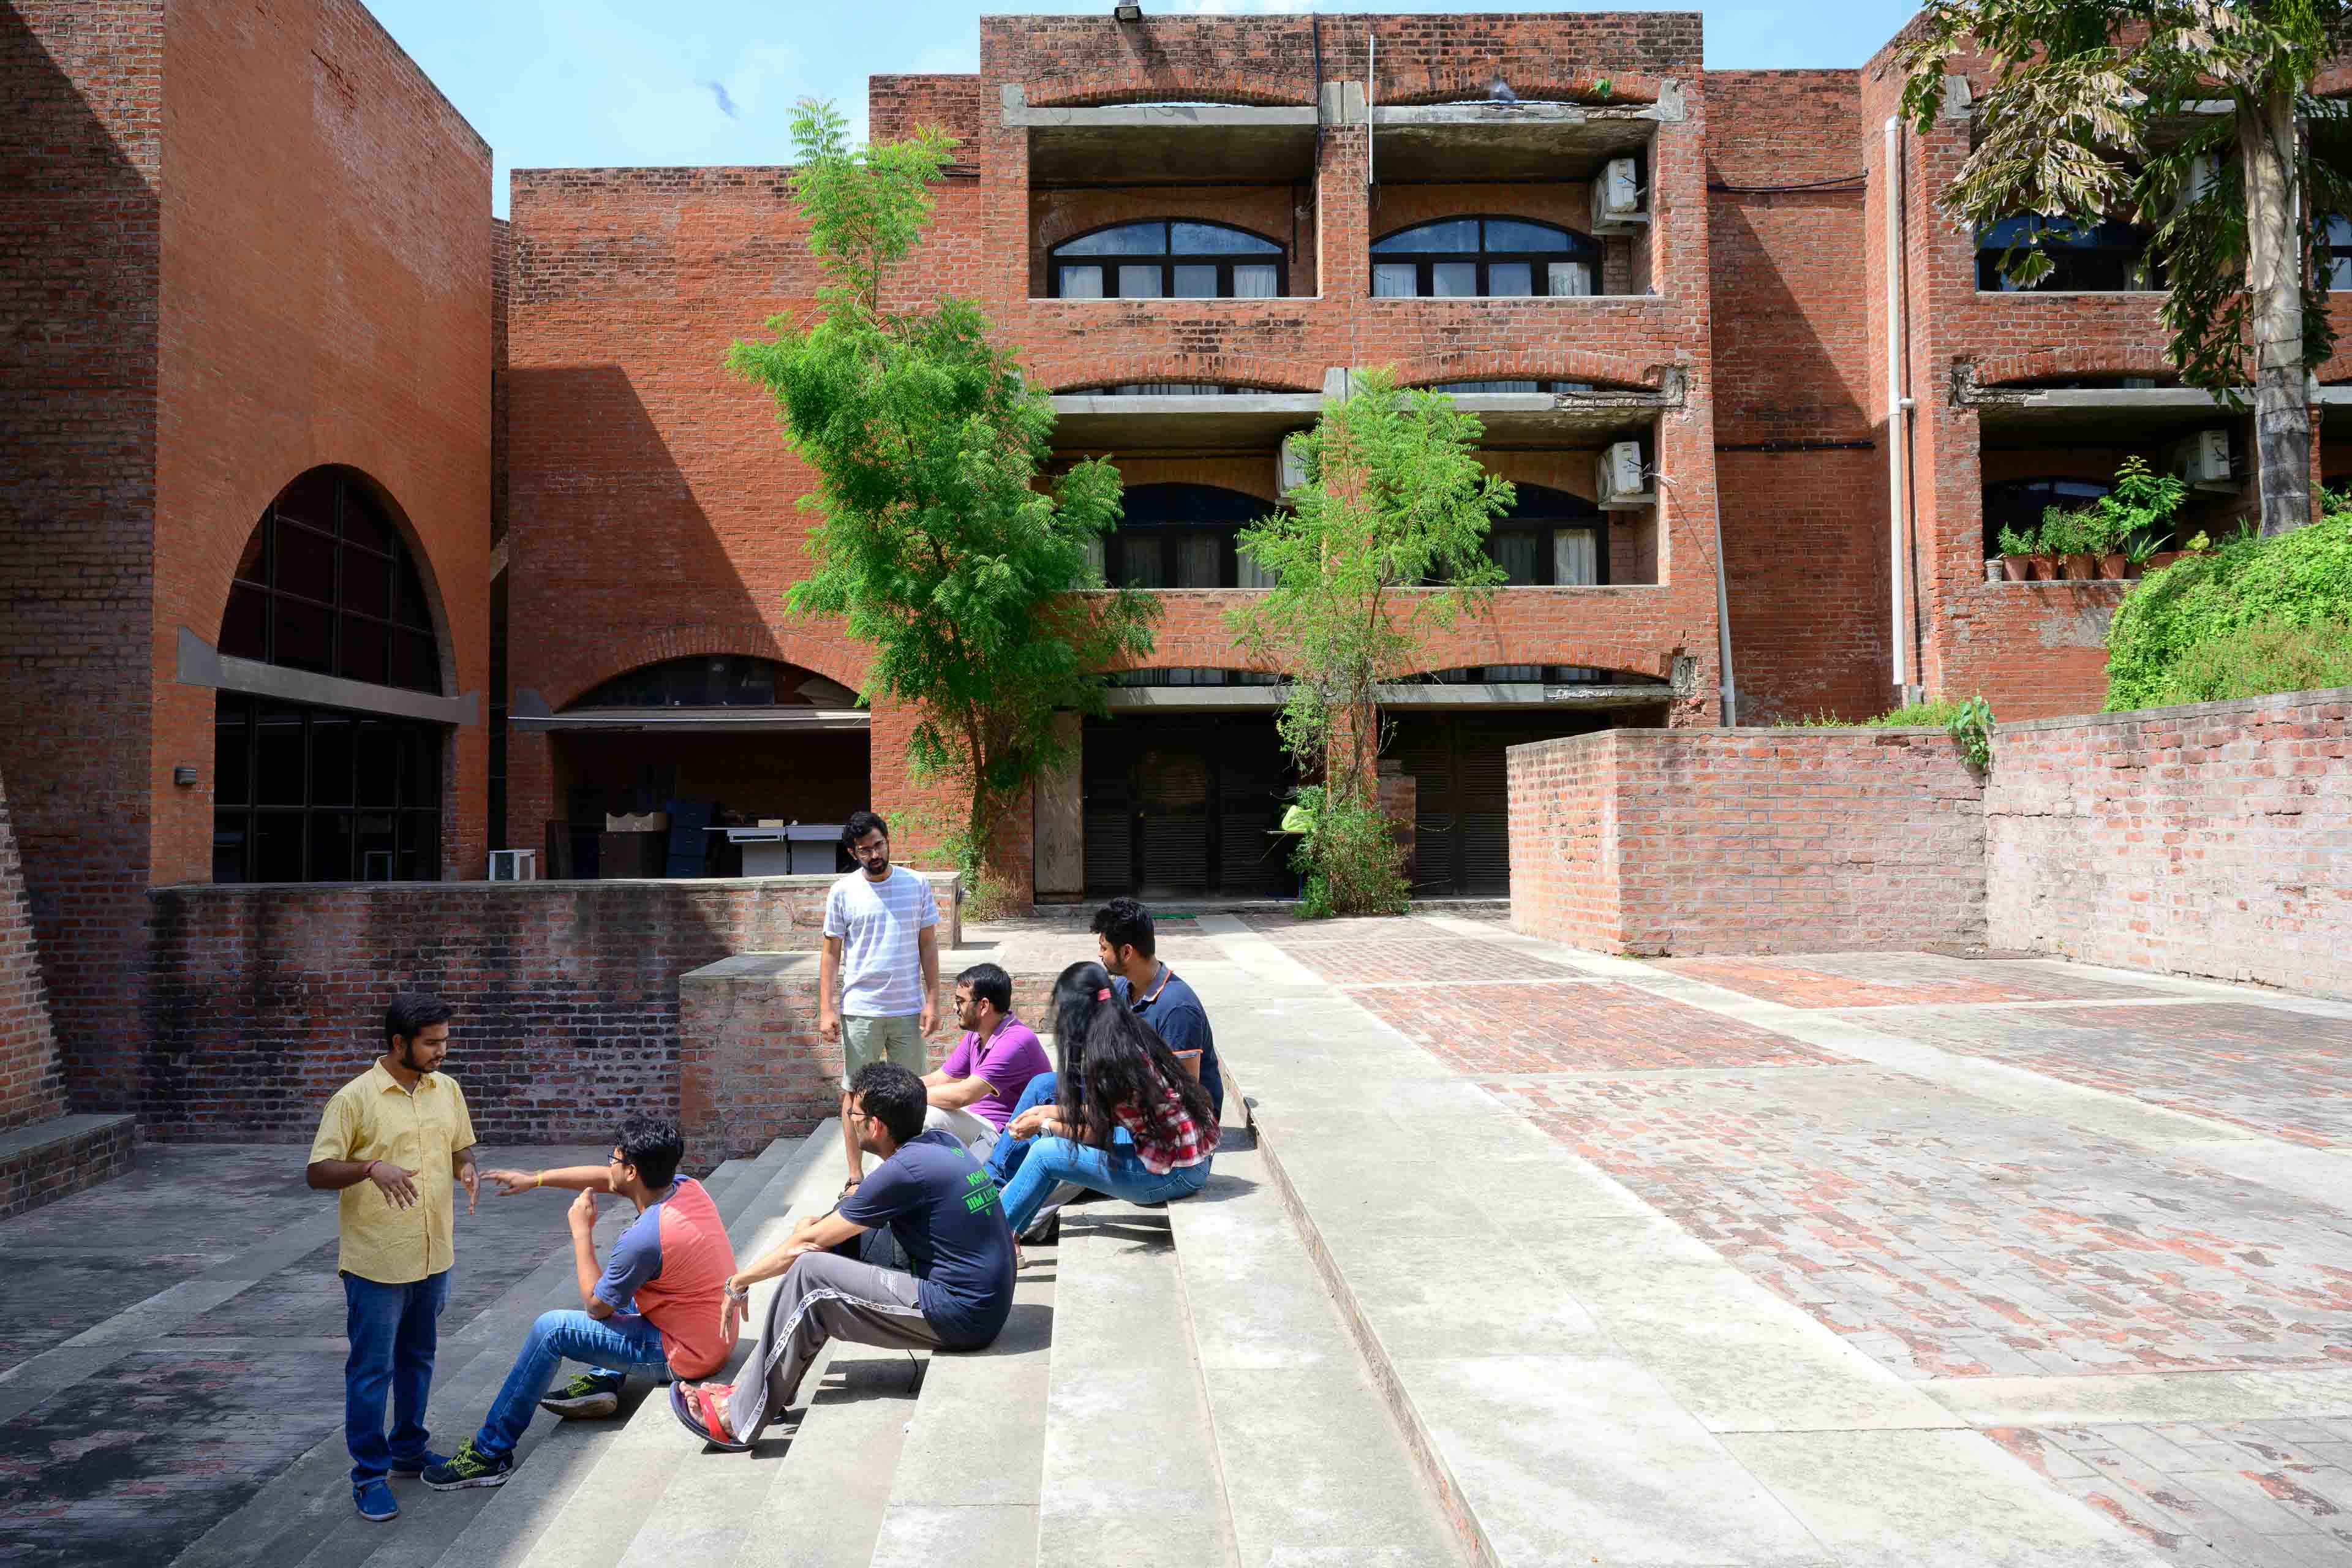 The Campus as a Part of the Learning Experience